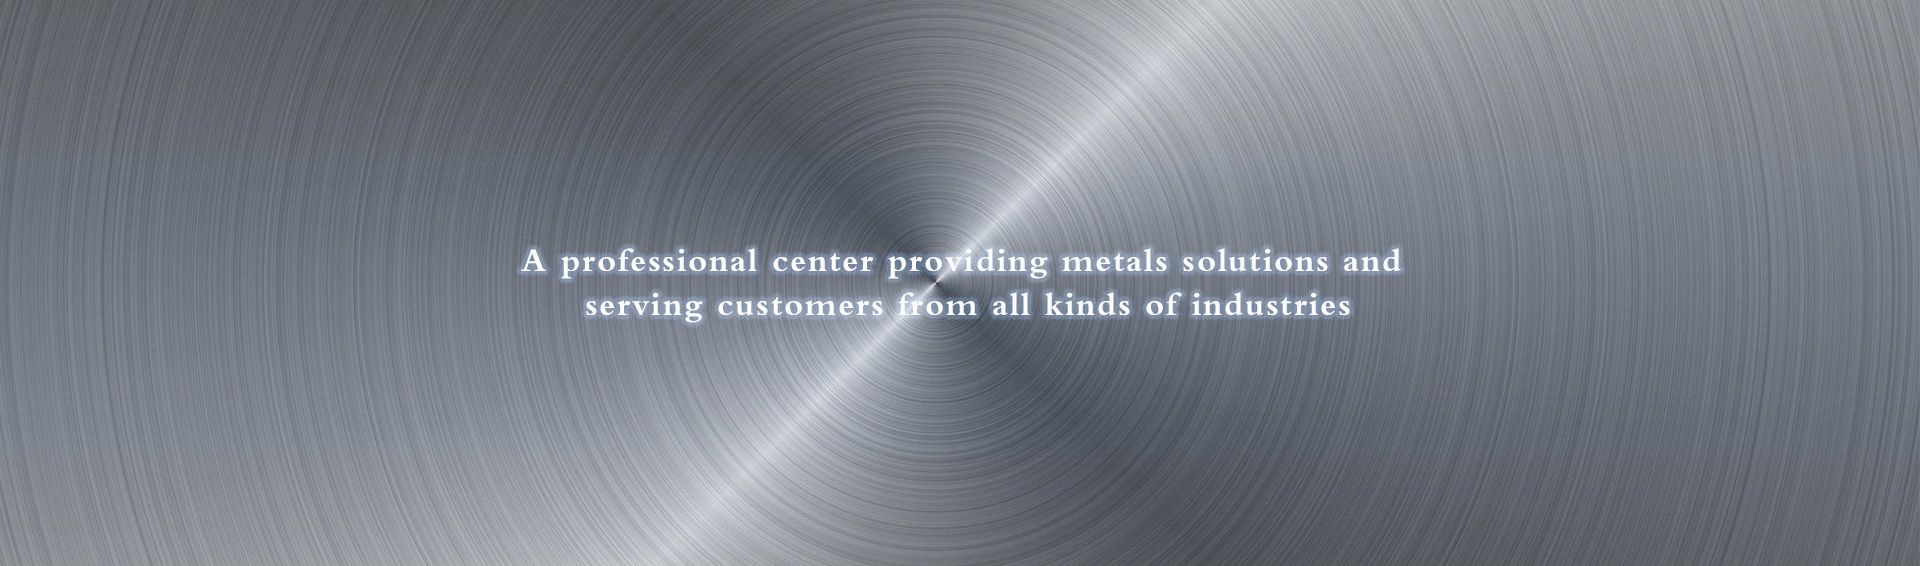 a professional center providing metals solutions and serving customers from all kinds of industries